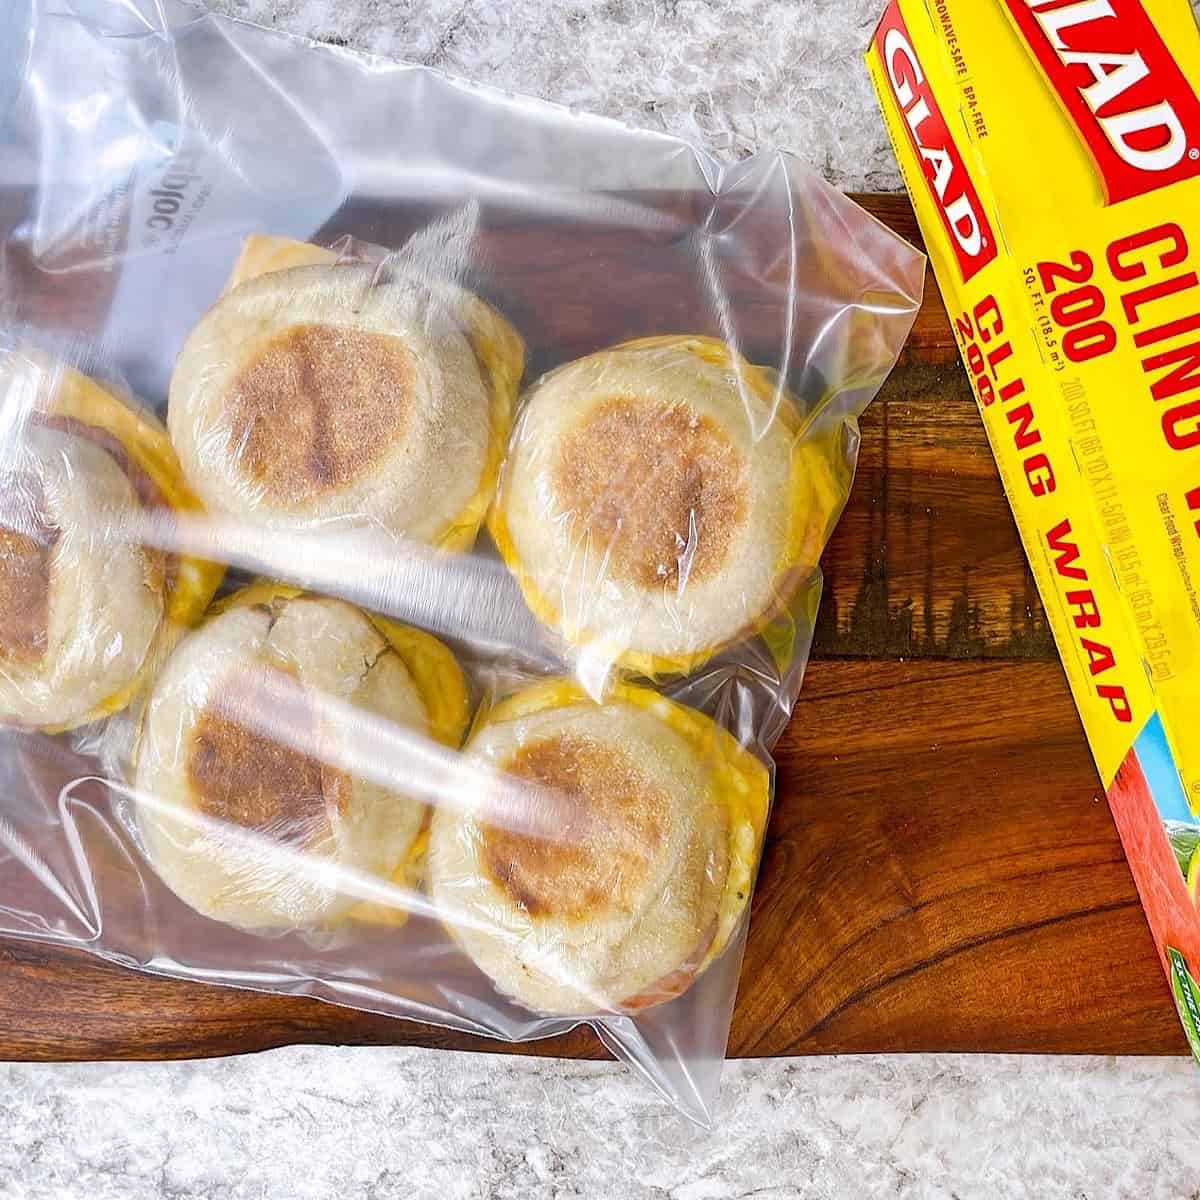 Freezer meal prep sandwiches sitting next to cling wrap in a freezer bag